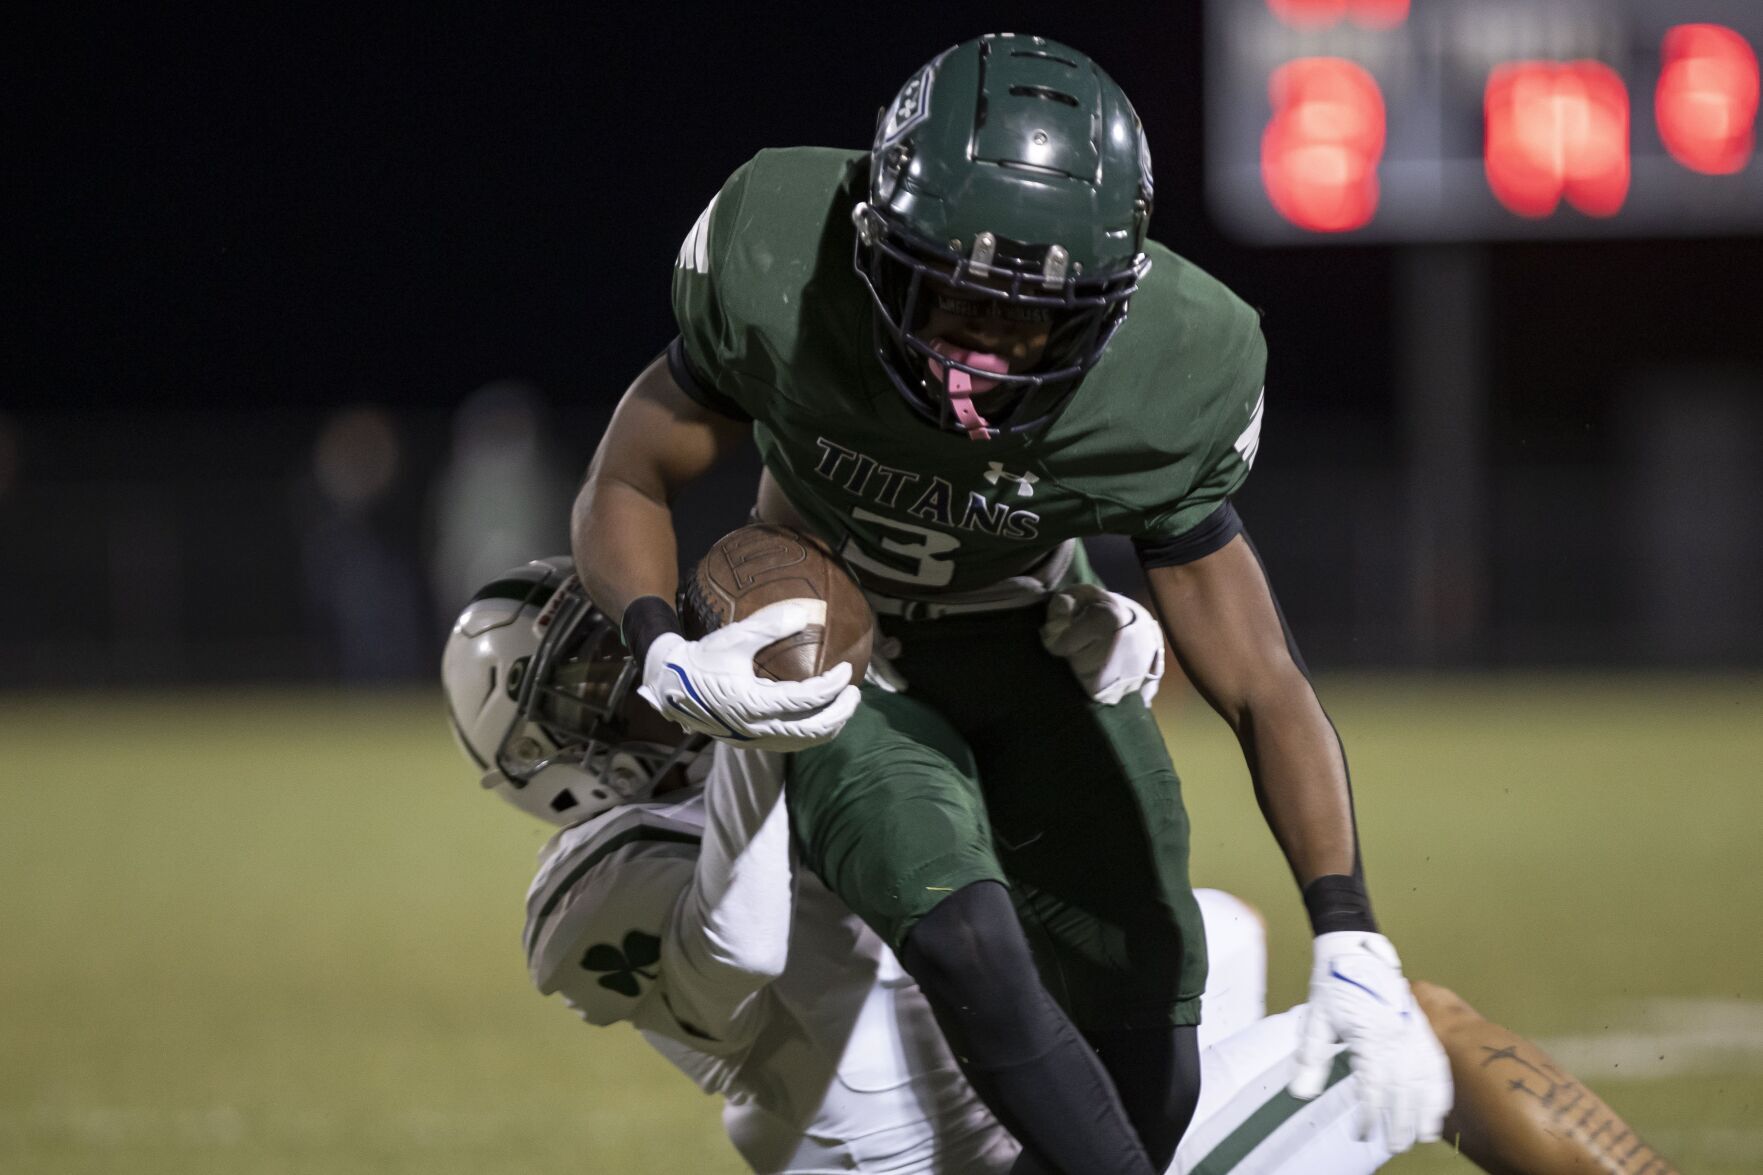 High school football playoff preview interviews with local coaches from VISAA to VHSL